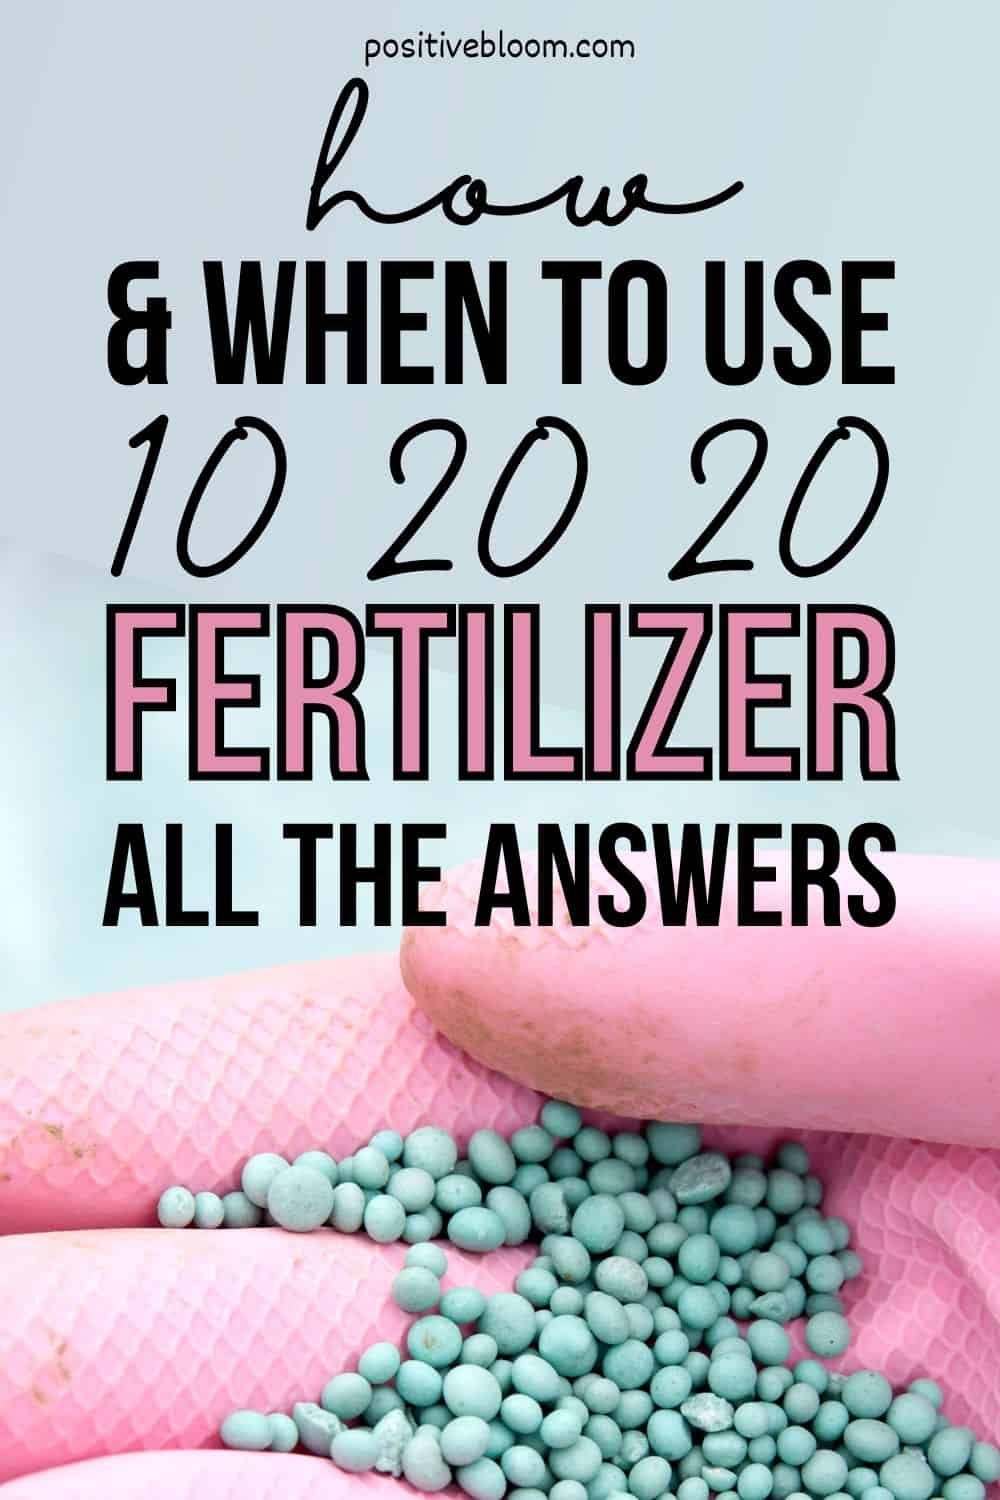  how & When To Use 10 20 20 Fertilizer: All The Answers Pinterest